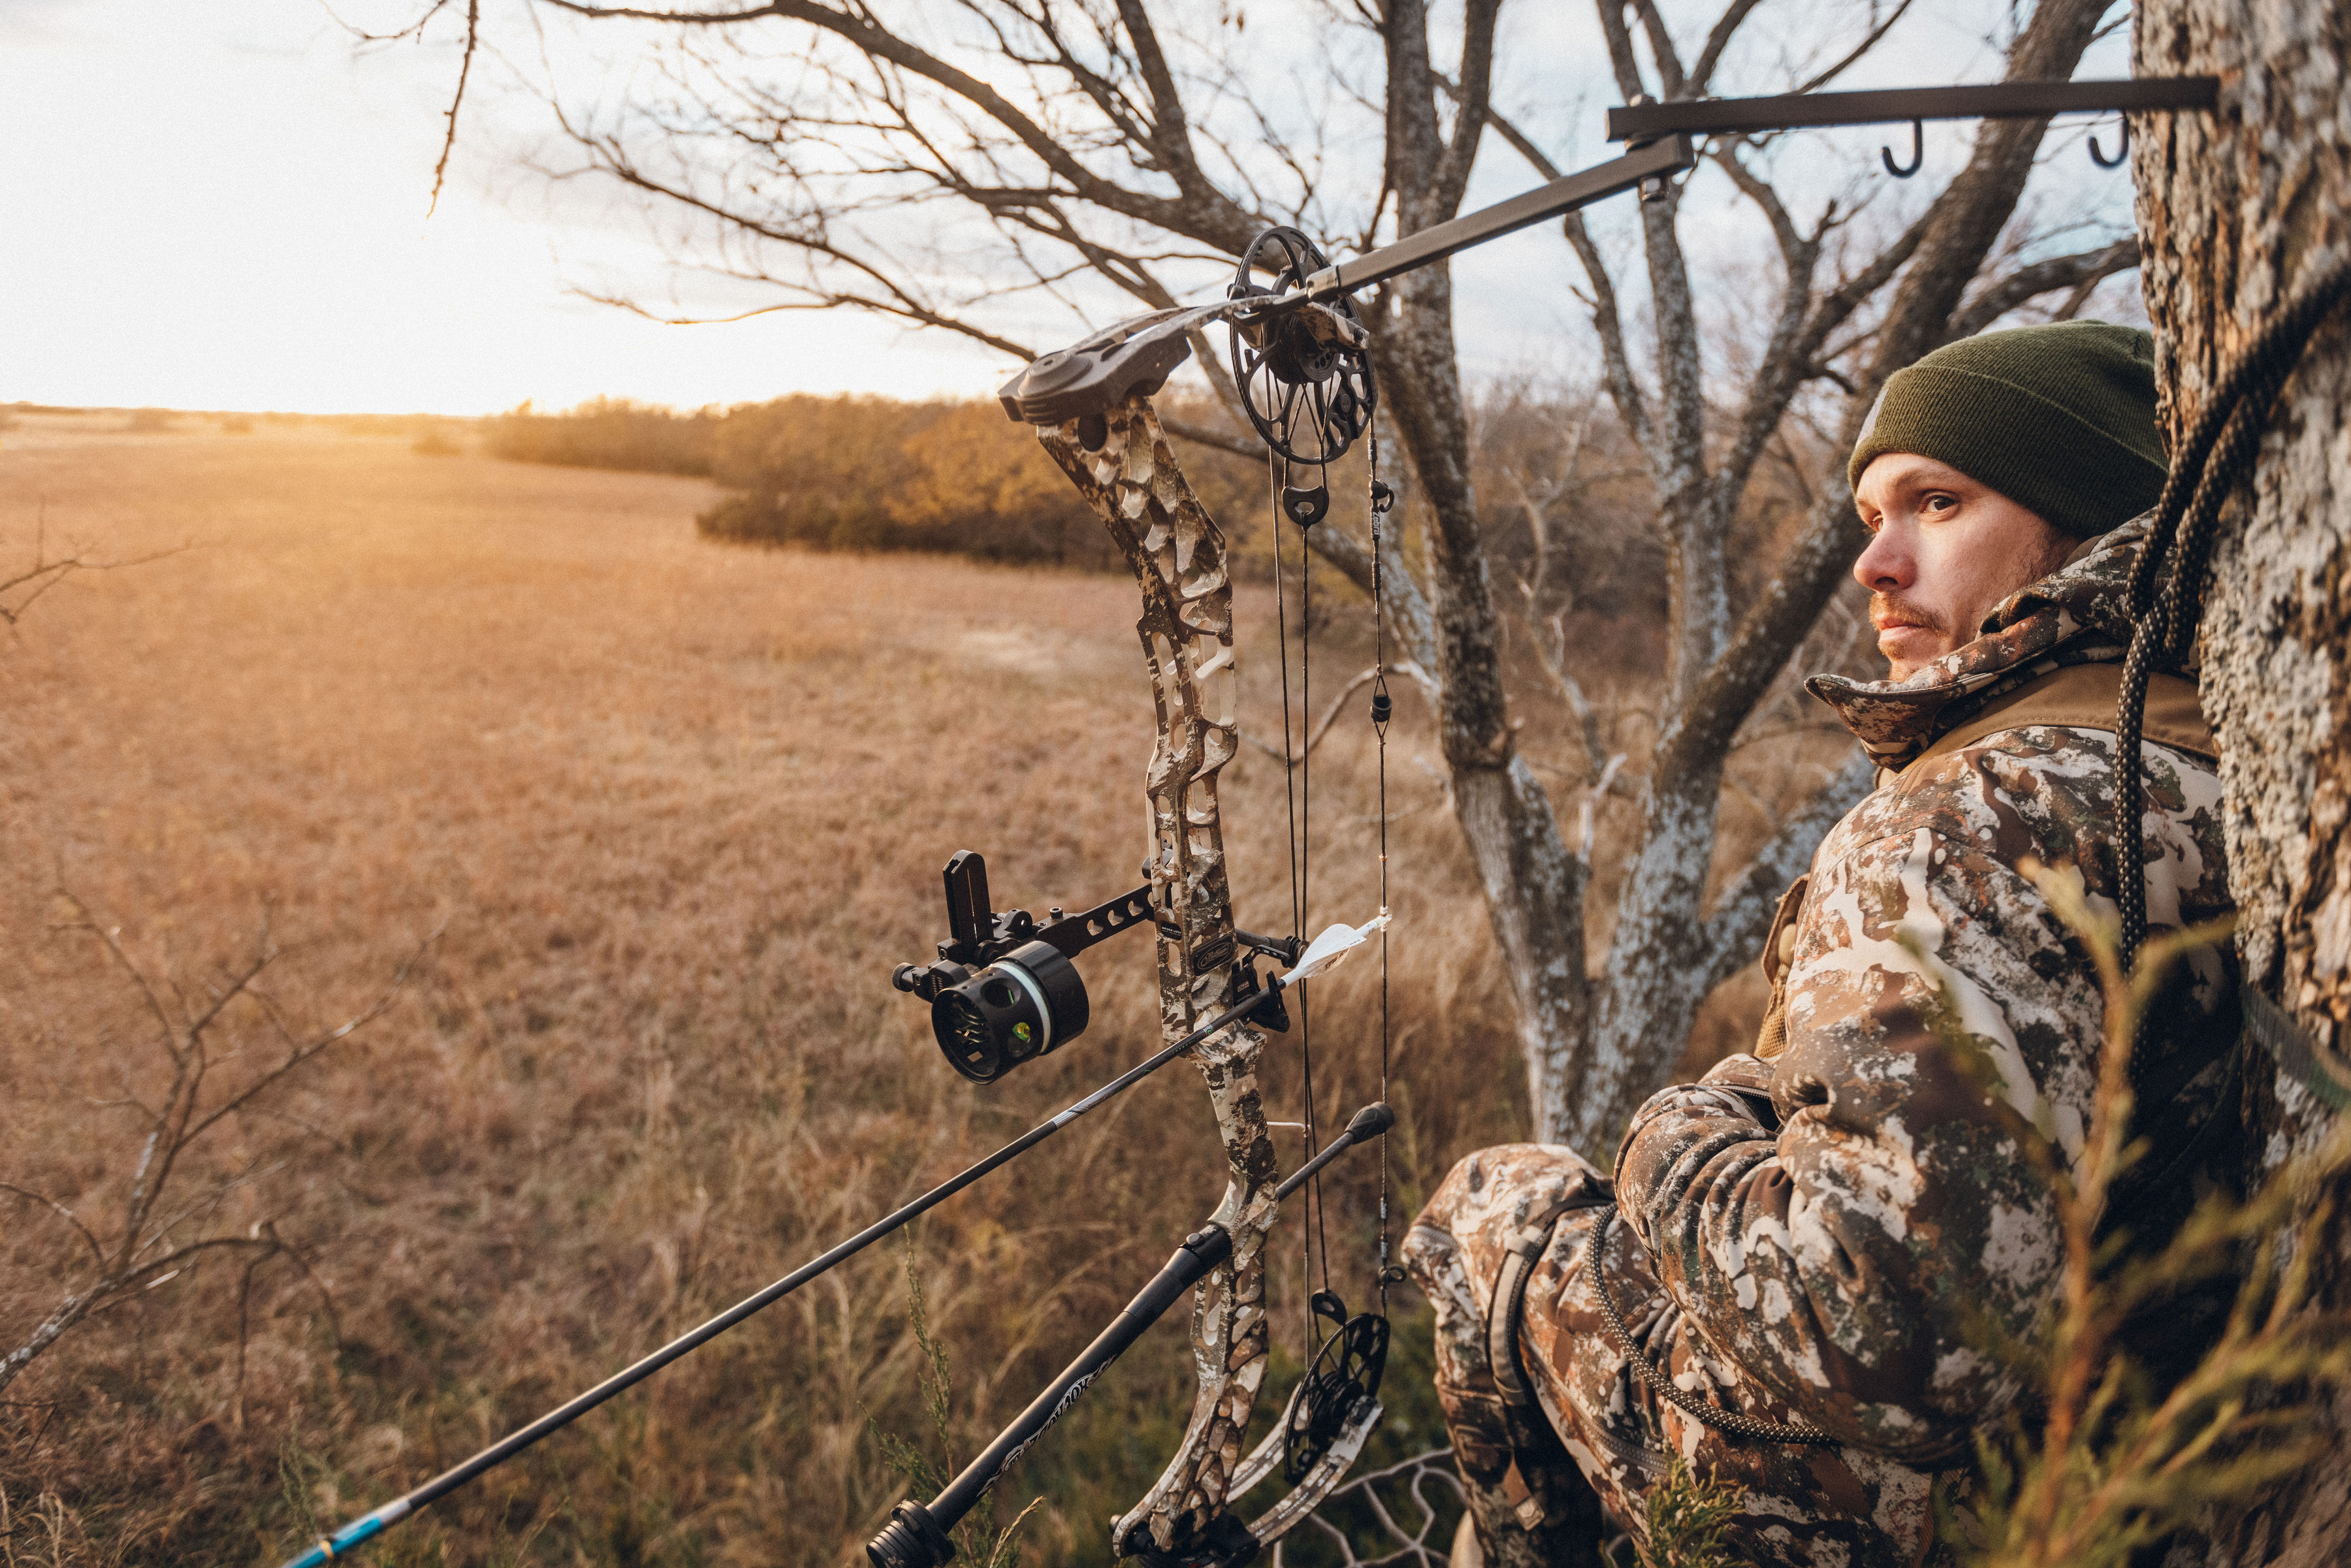 Free Gear Fridays: Win a First Lite Hunting Kit of Your Choice